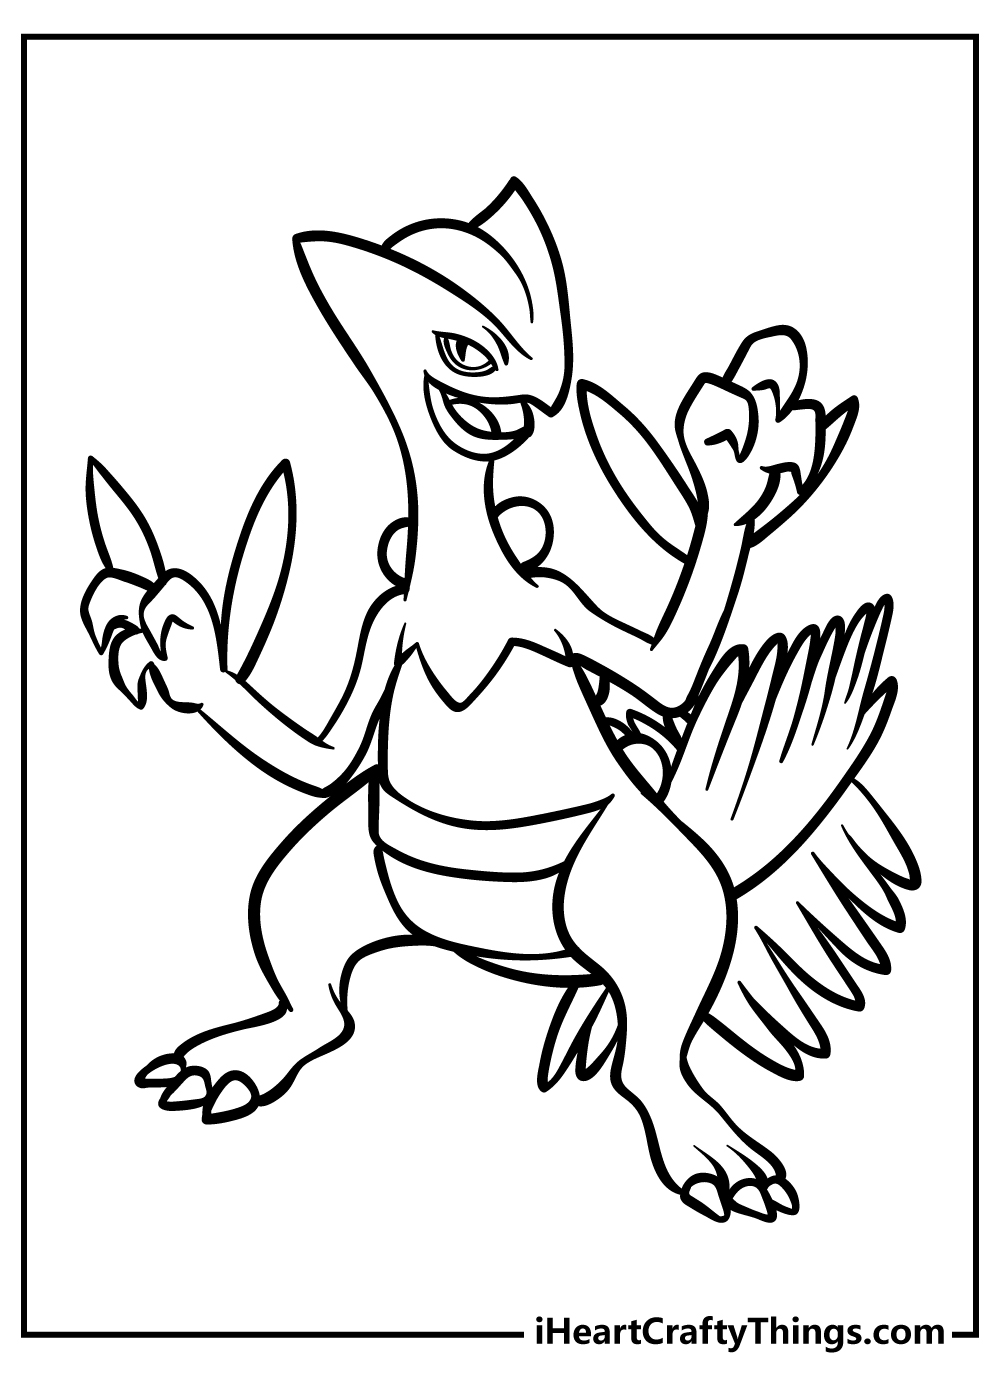 Mega Pokemon Coloring Book for adults free download